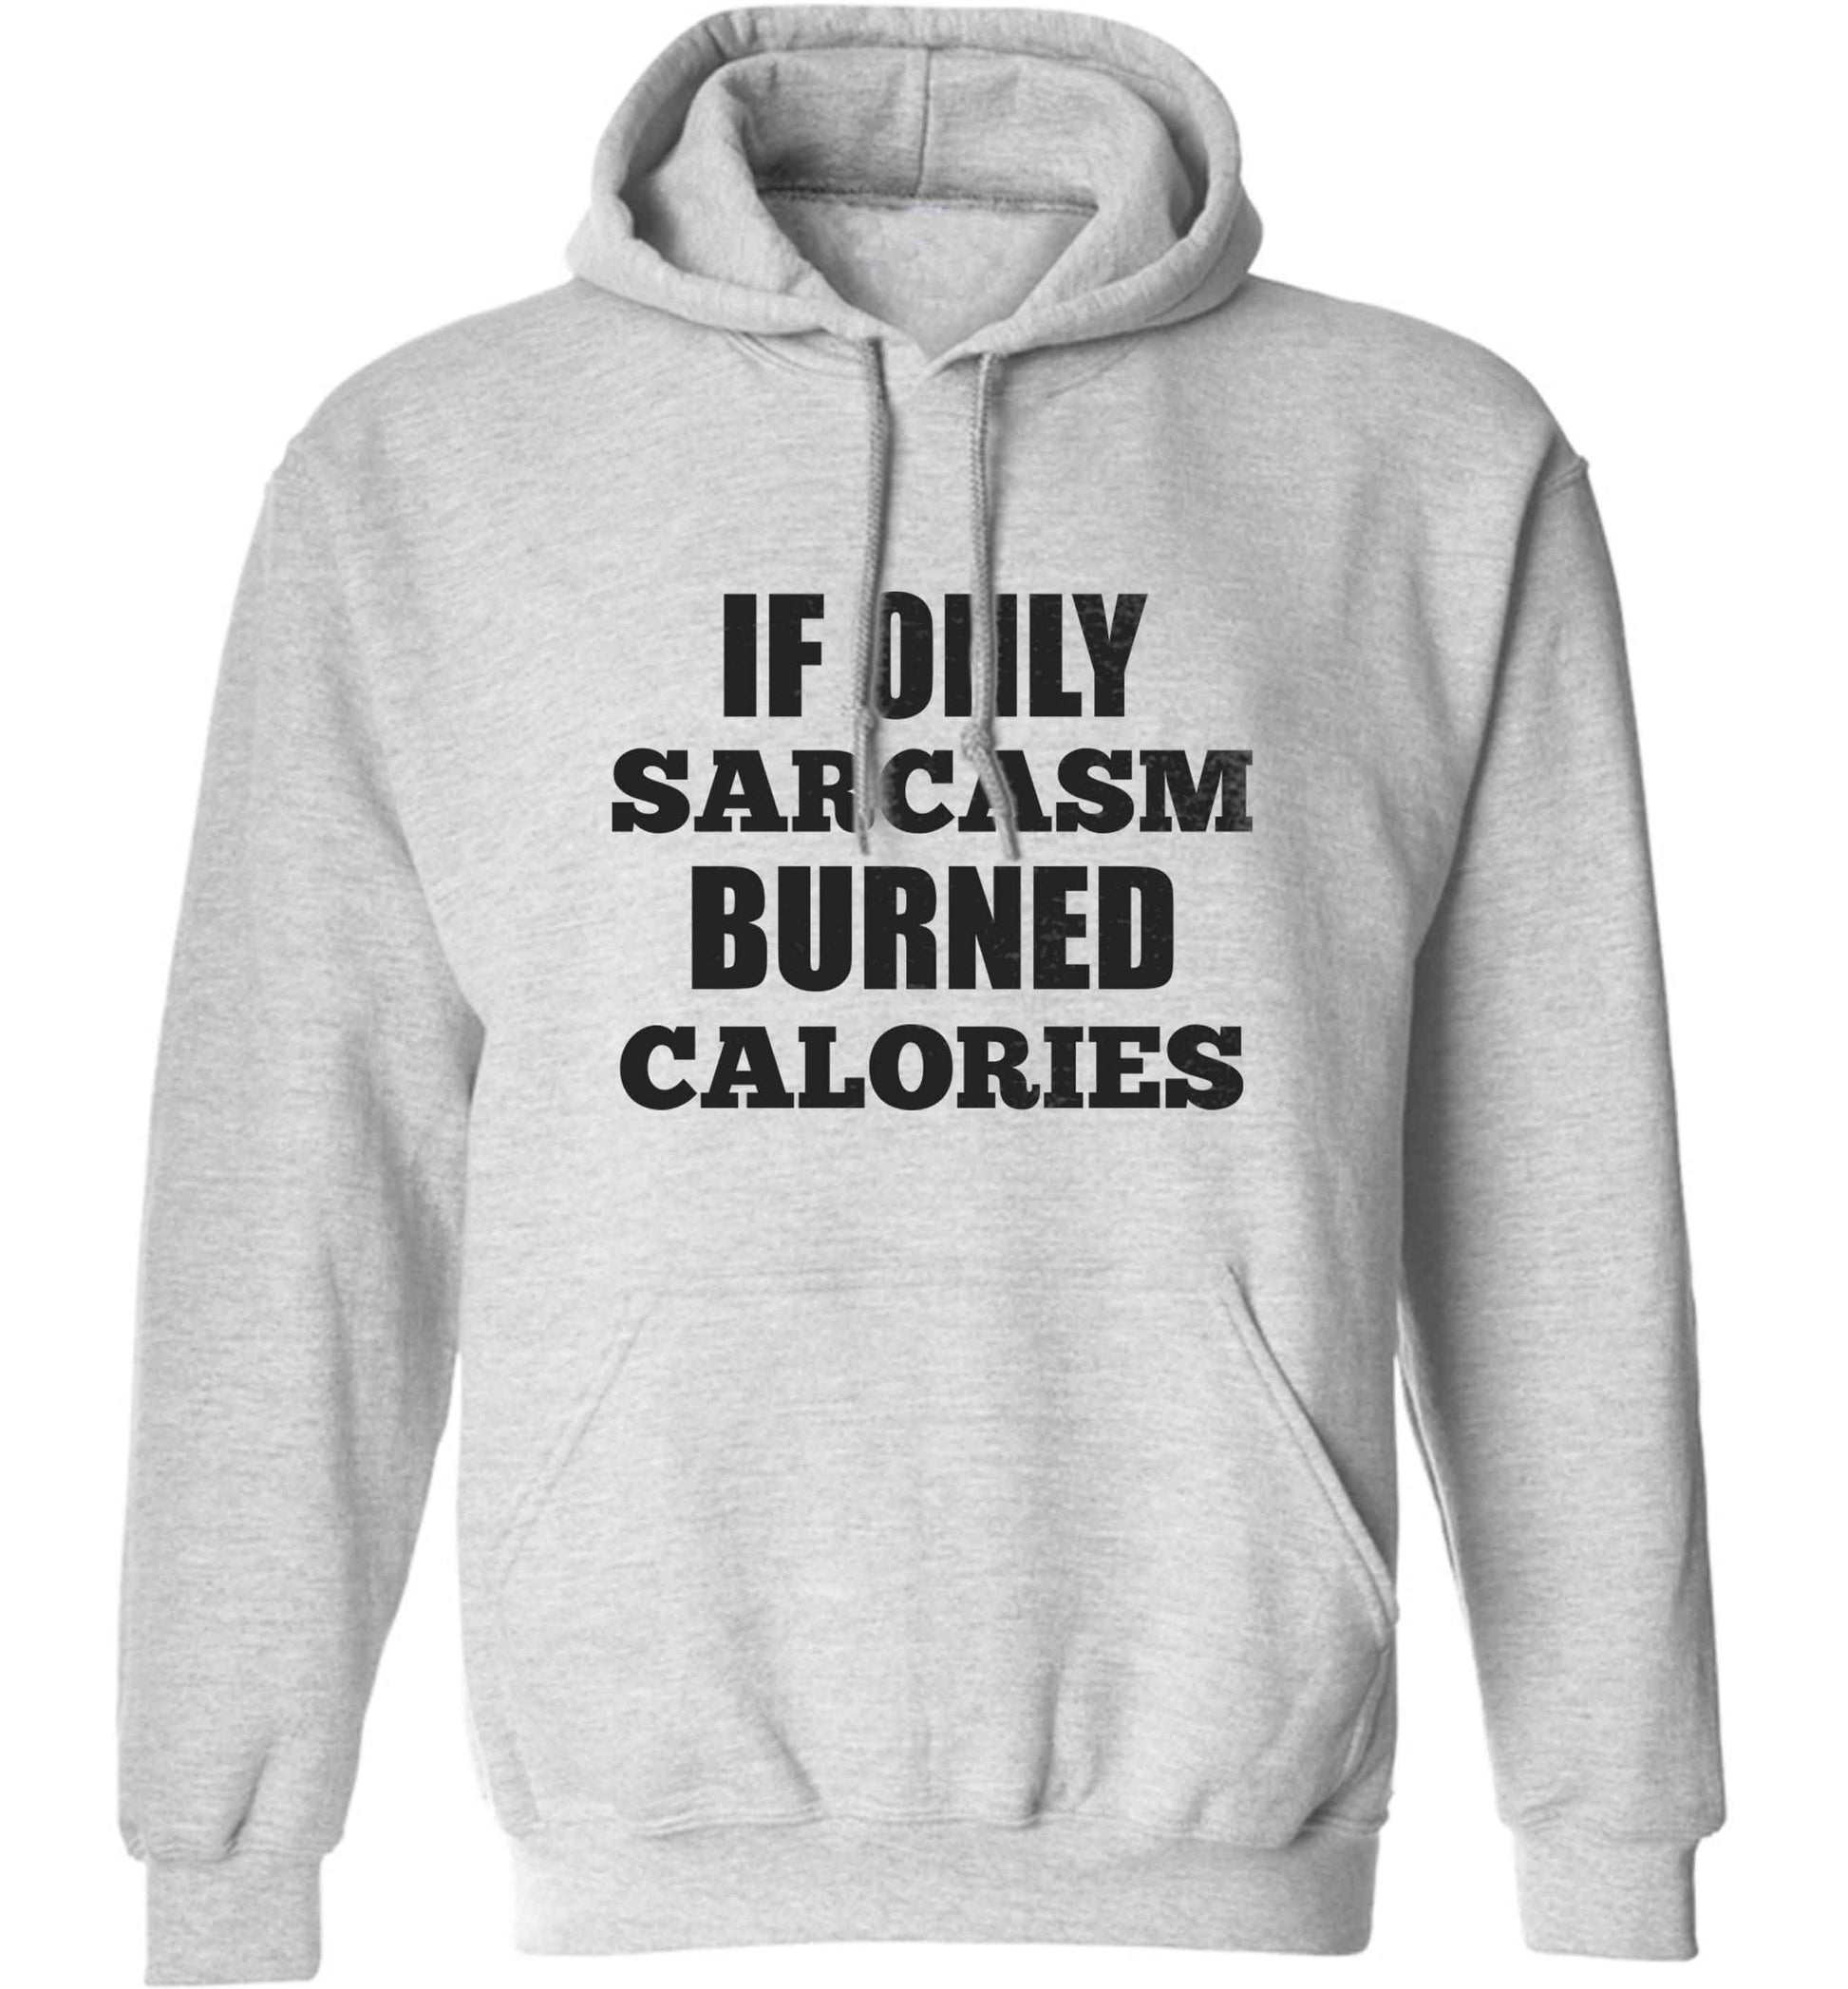 If only sarcasm burned calories adults unisex grey hoodie 2XL